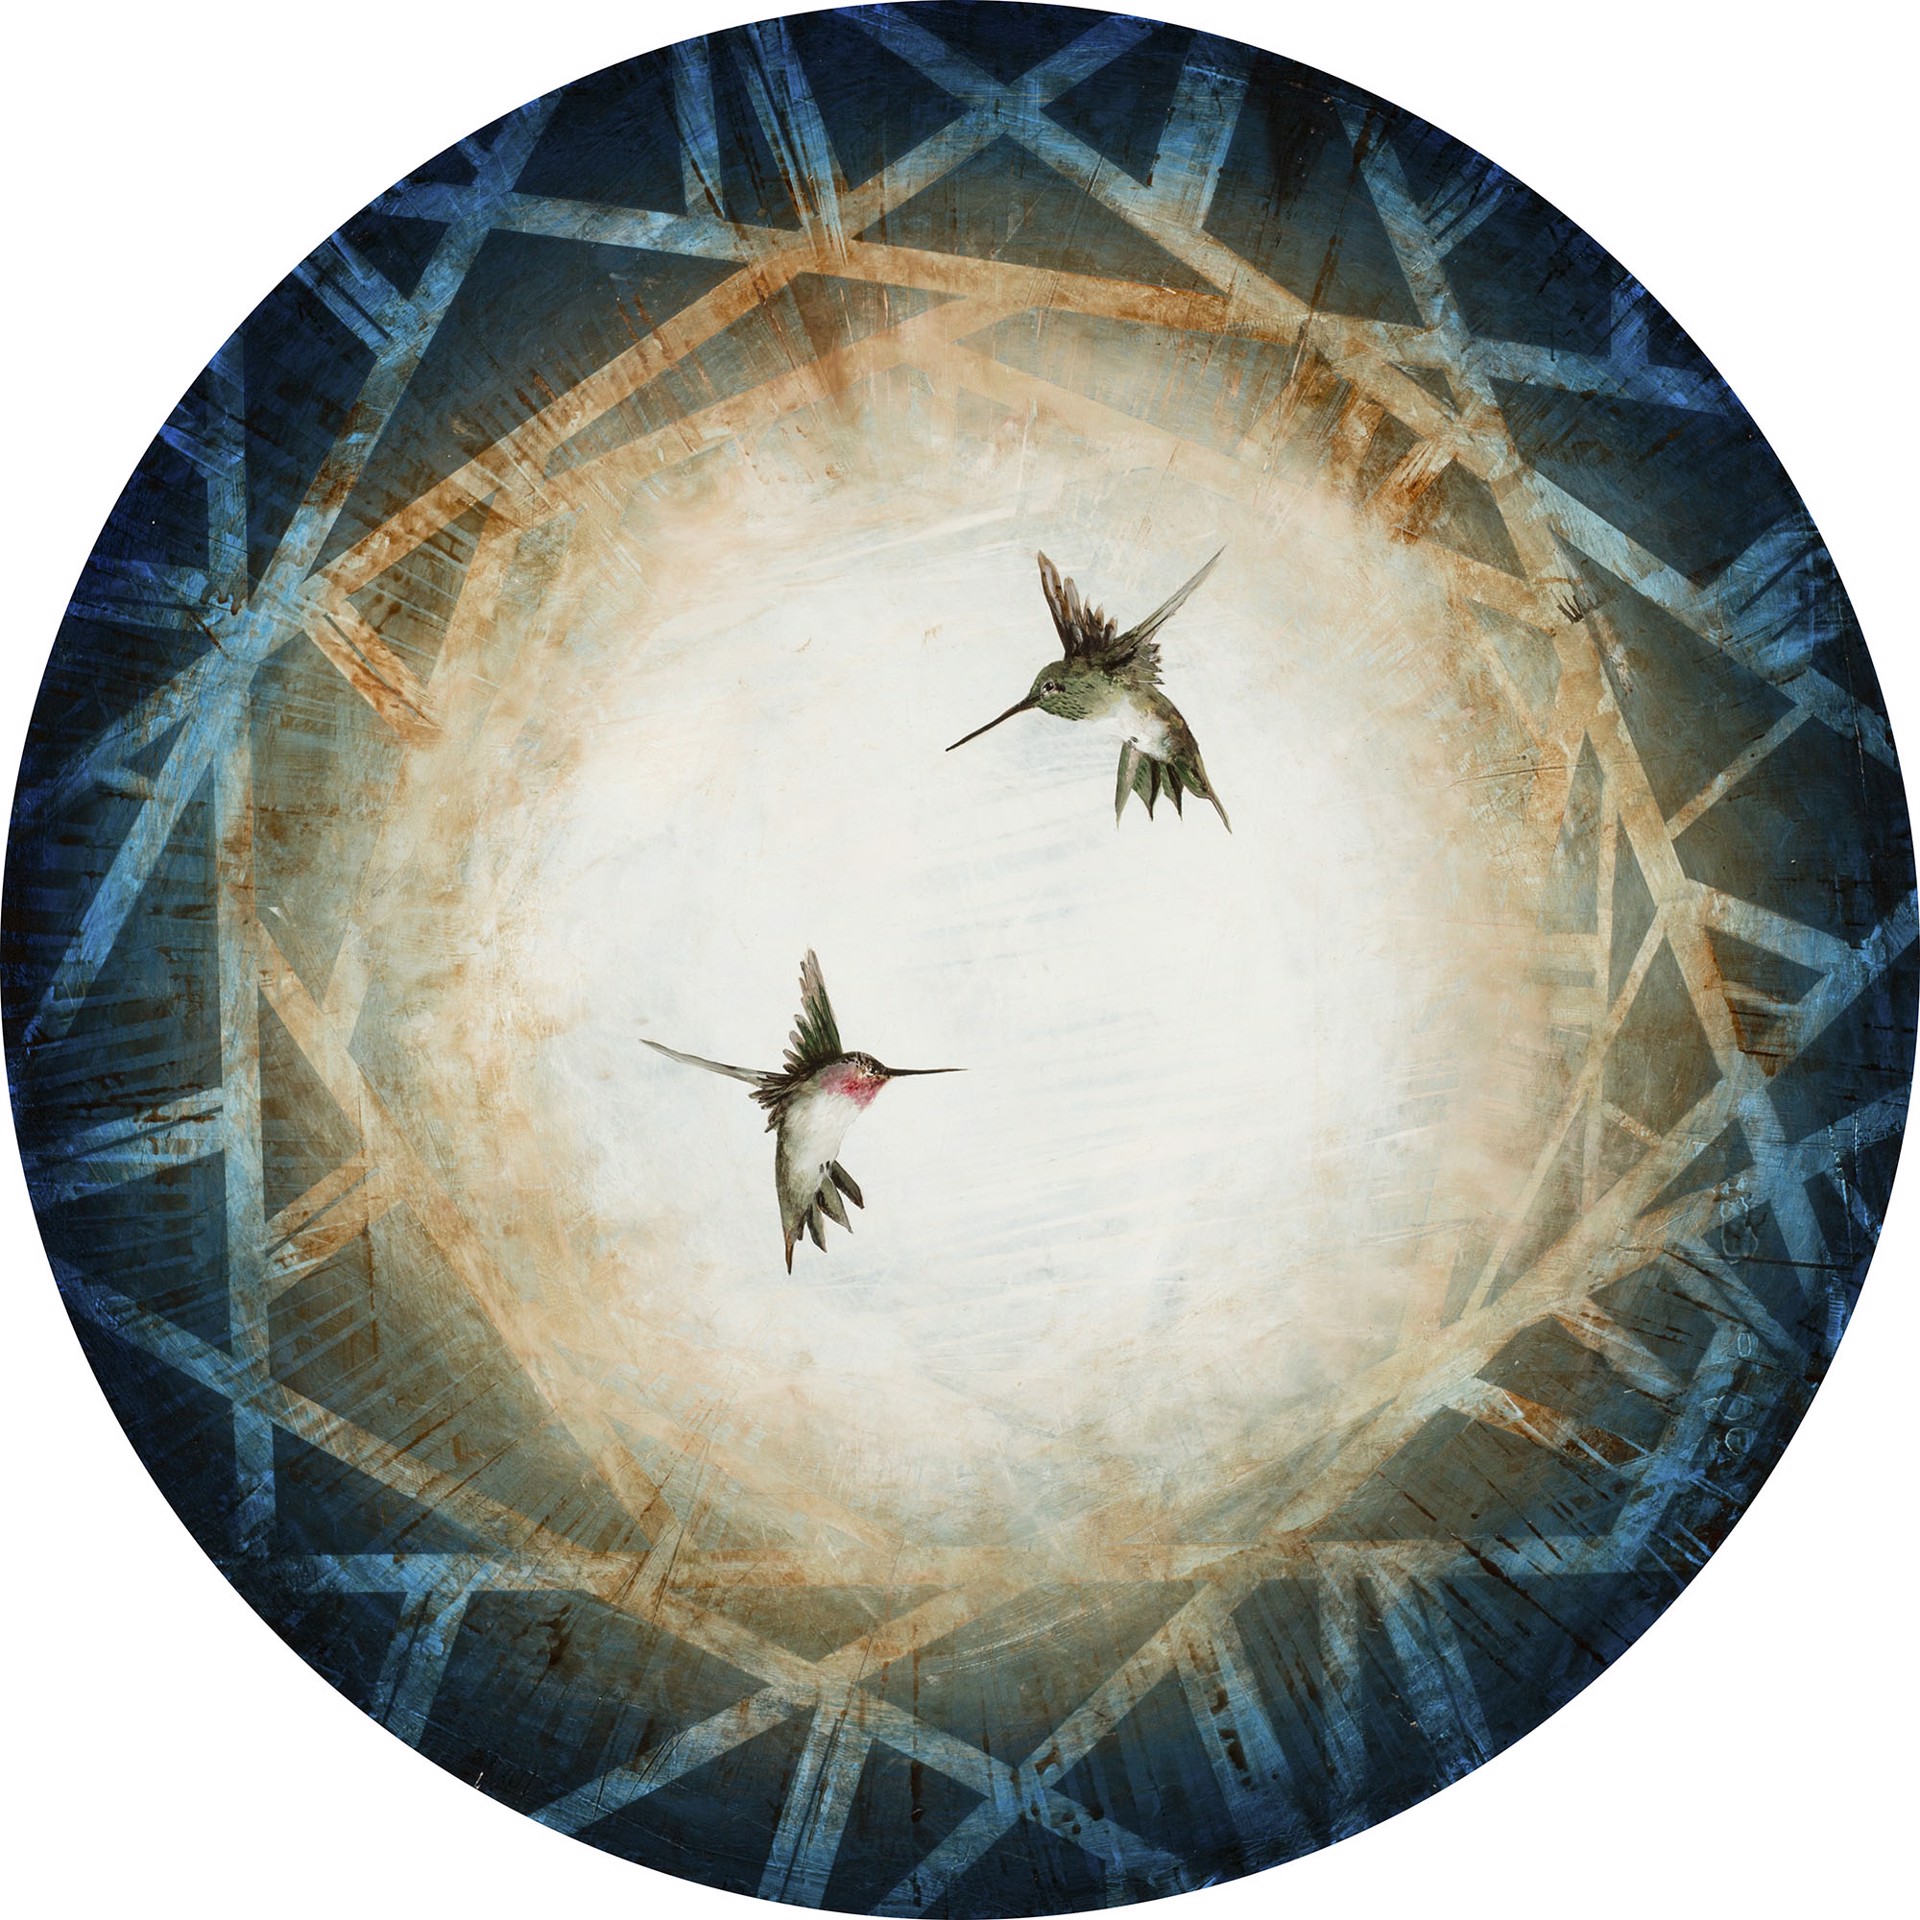 Original Contemporary Oil Painting On A Round Panel Of Humming Birds In Flight Featuring A Vignetted Background Going From Tan In The Center To  Blue Outside, By Jenna Von Benedikt